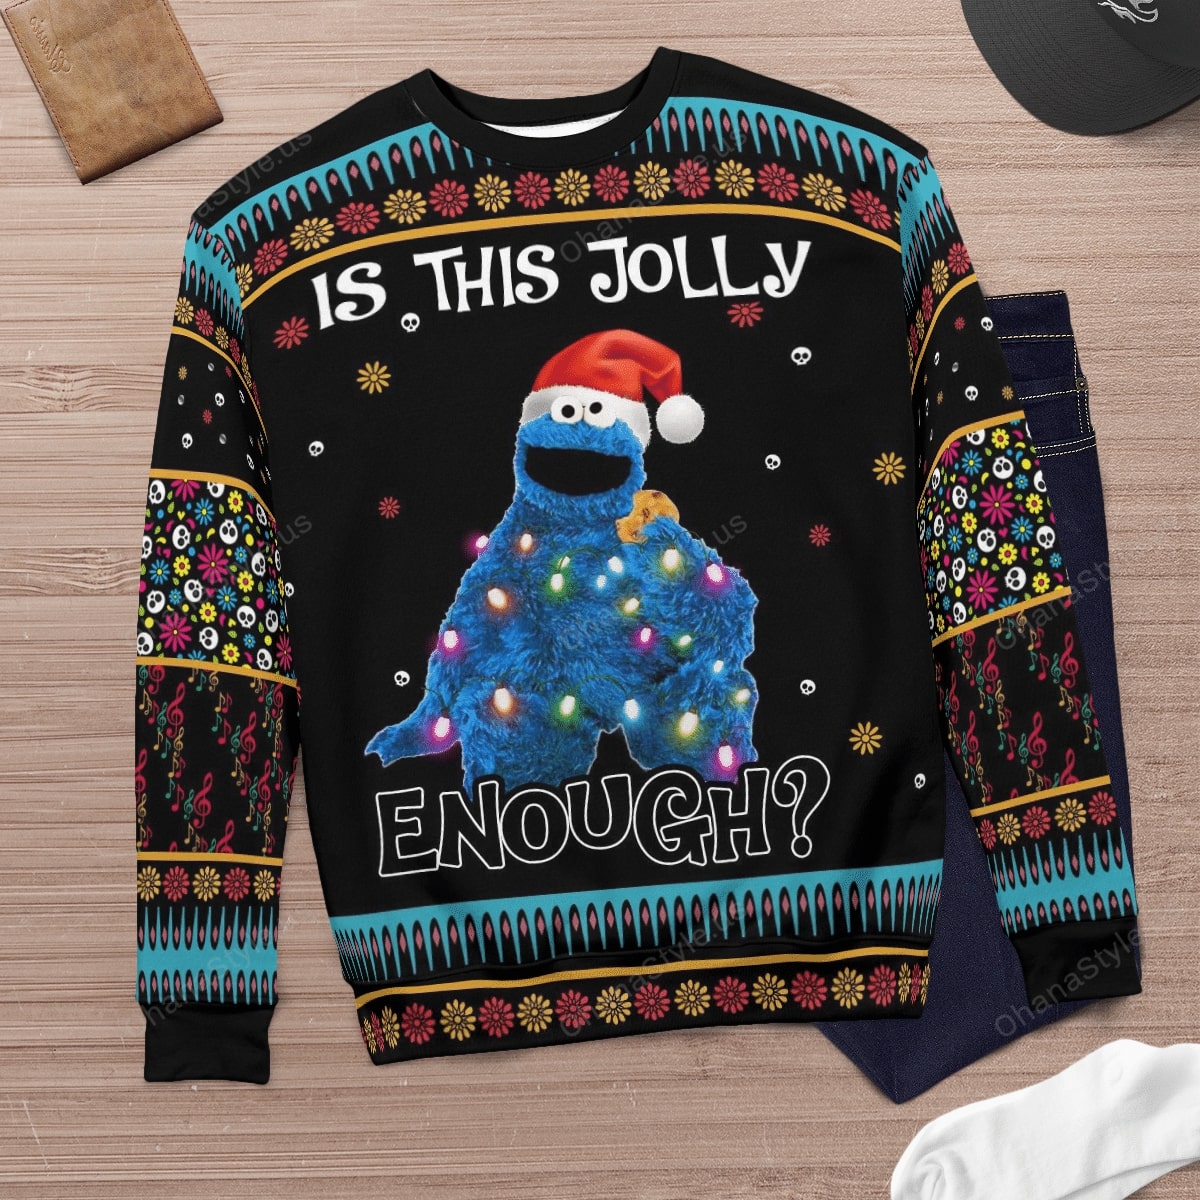 [ Amazing ] Cookie Monster muppet Is this jolly enough christmas sweater – Saleoff 031221